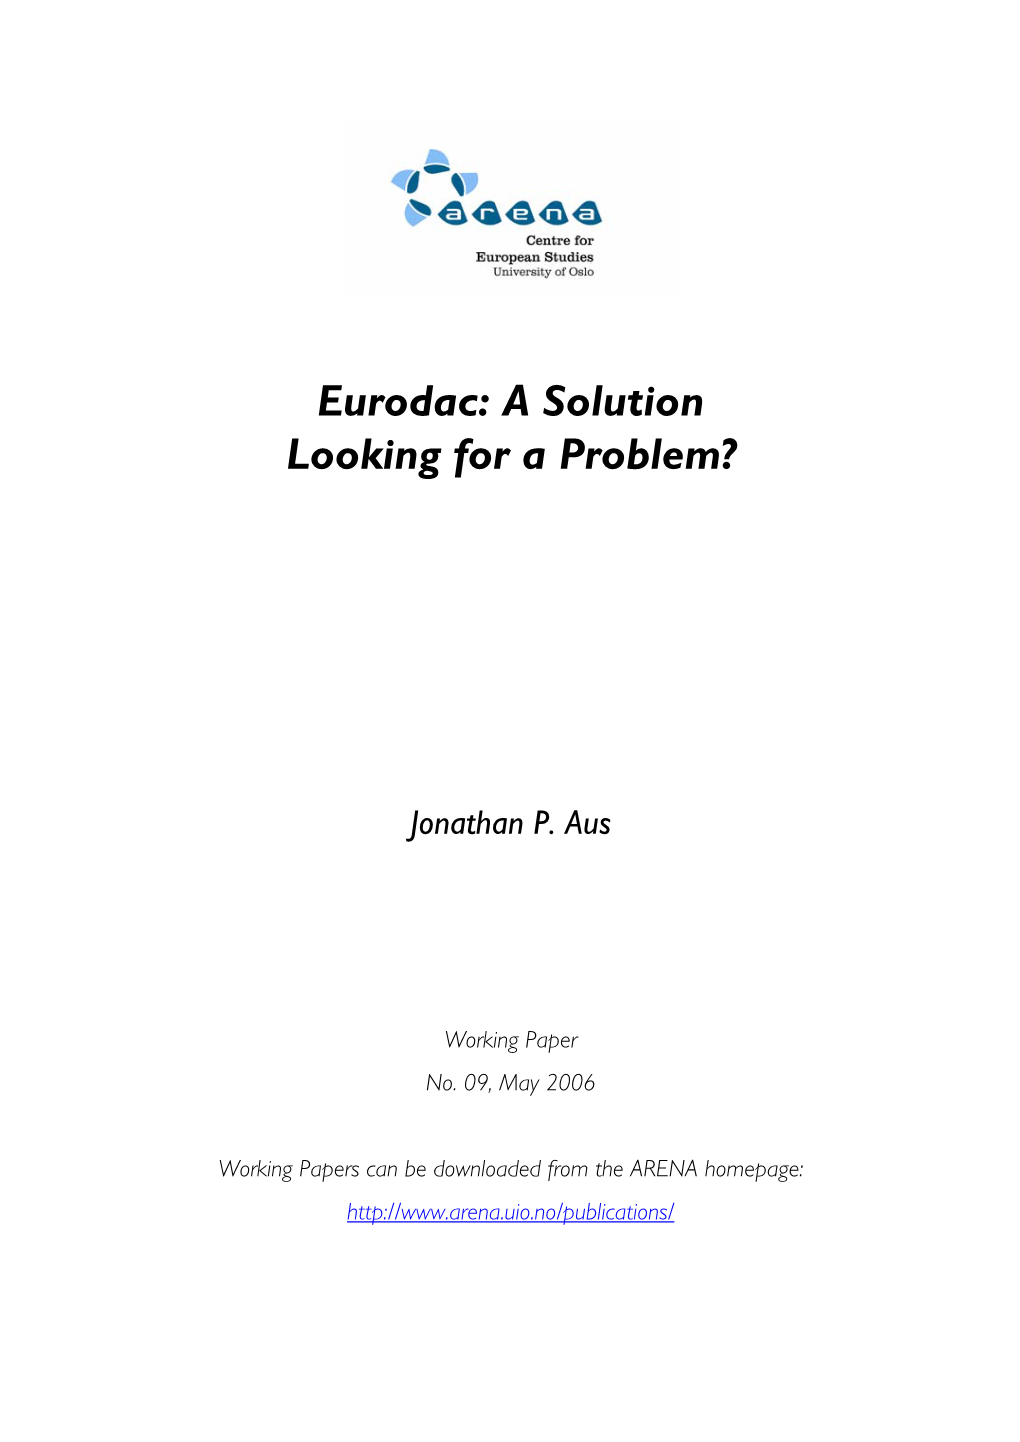 Eurodac: a Solution Looking for a Problem?